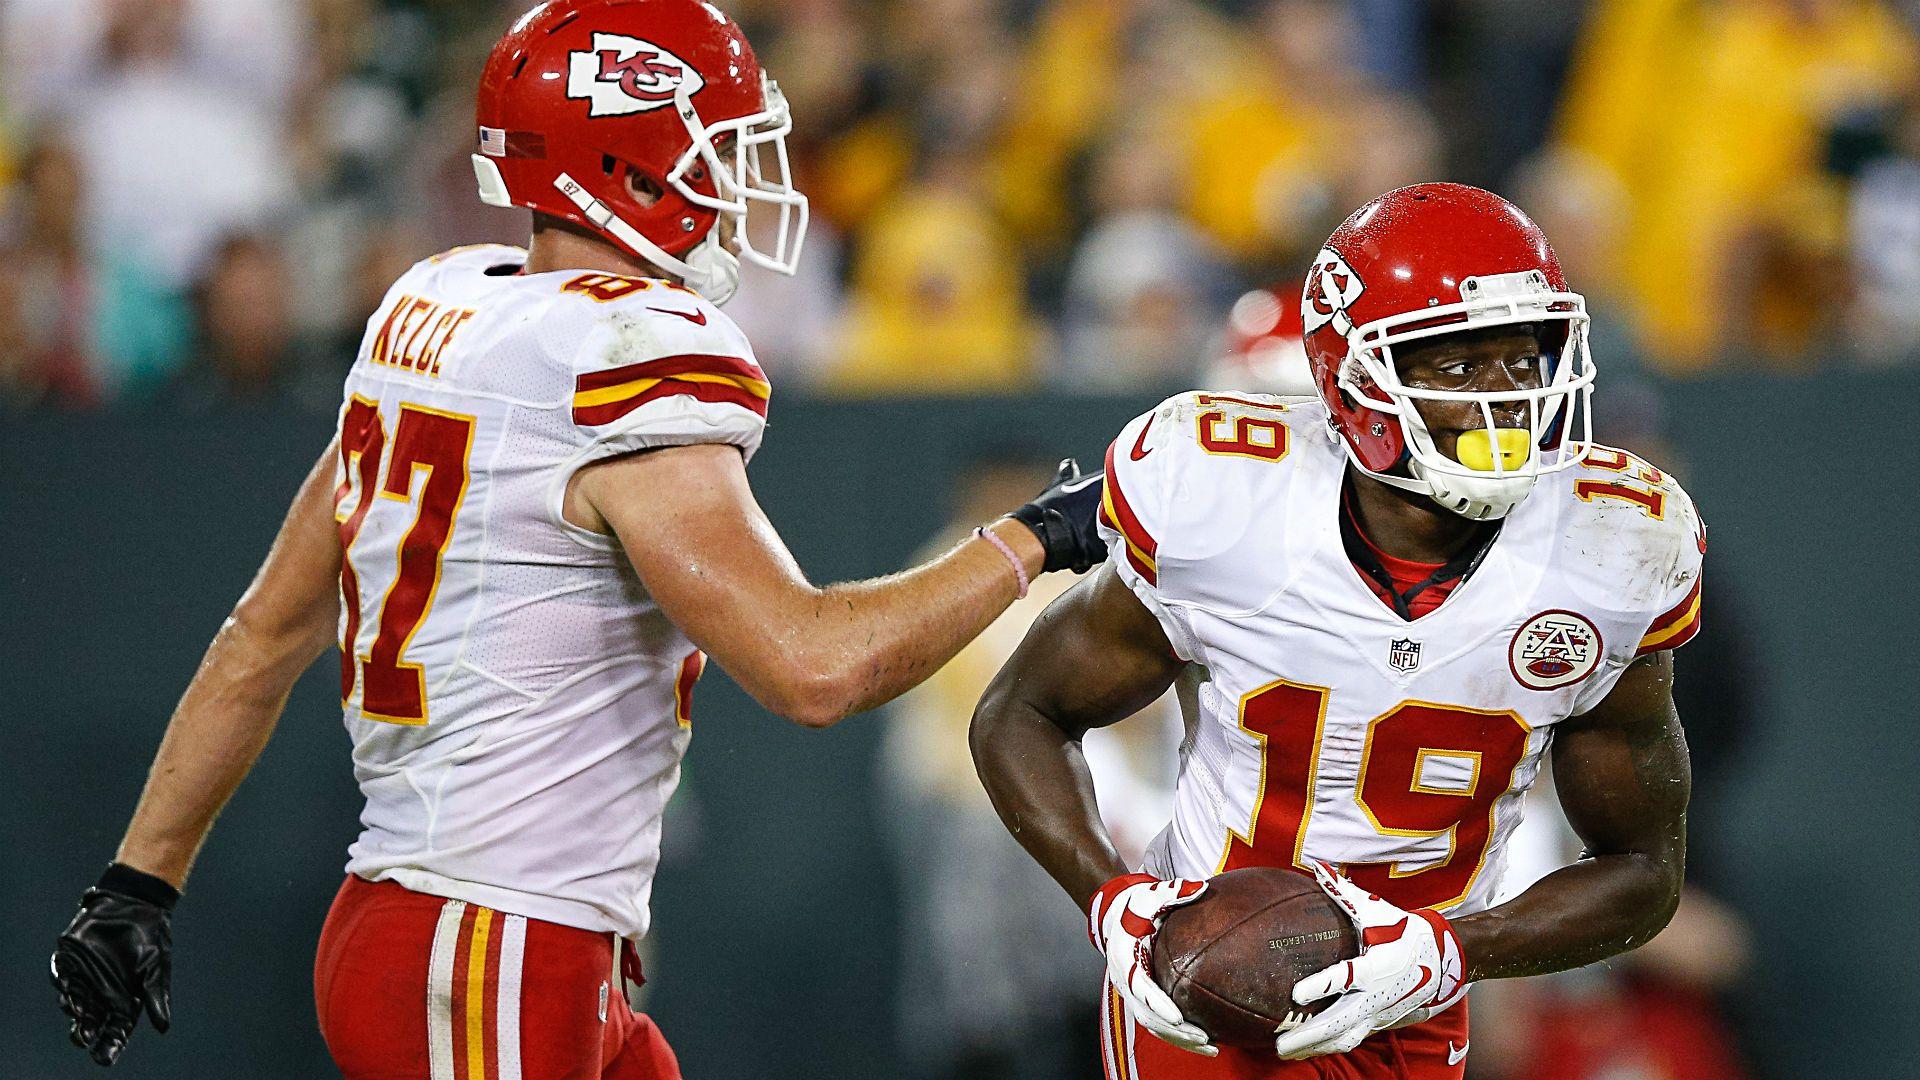 Chiefs WR finally catches TD pass; Jeremy Maclin ends drought